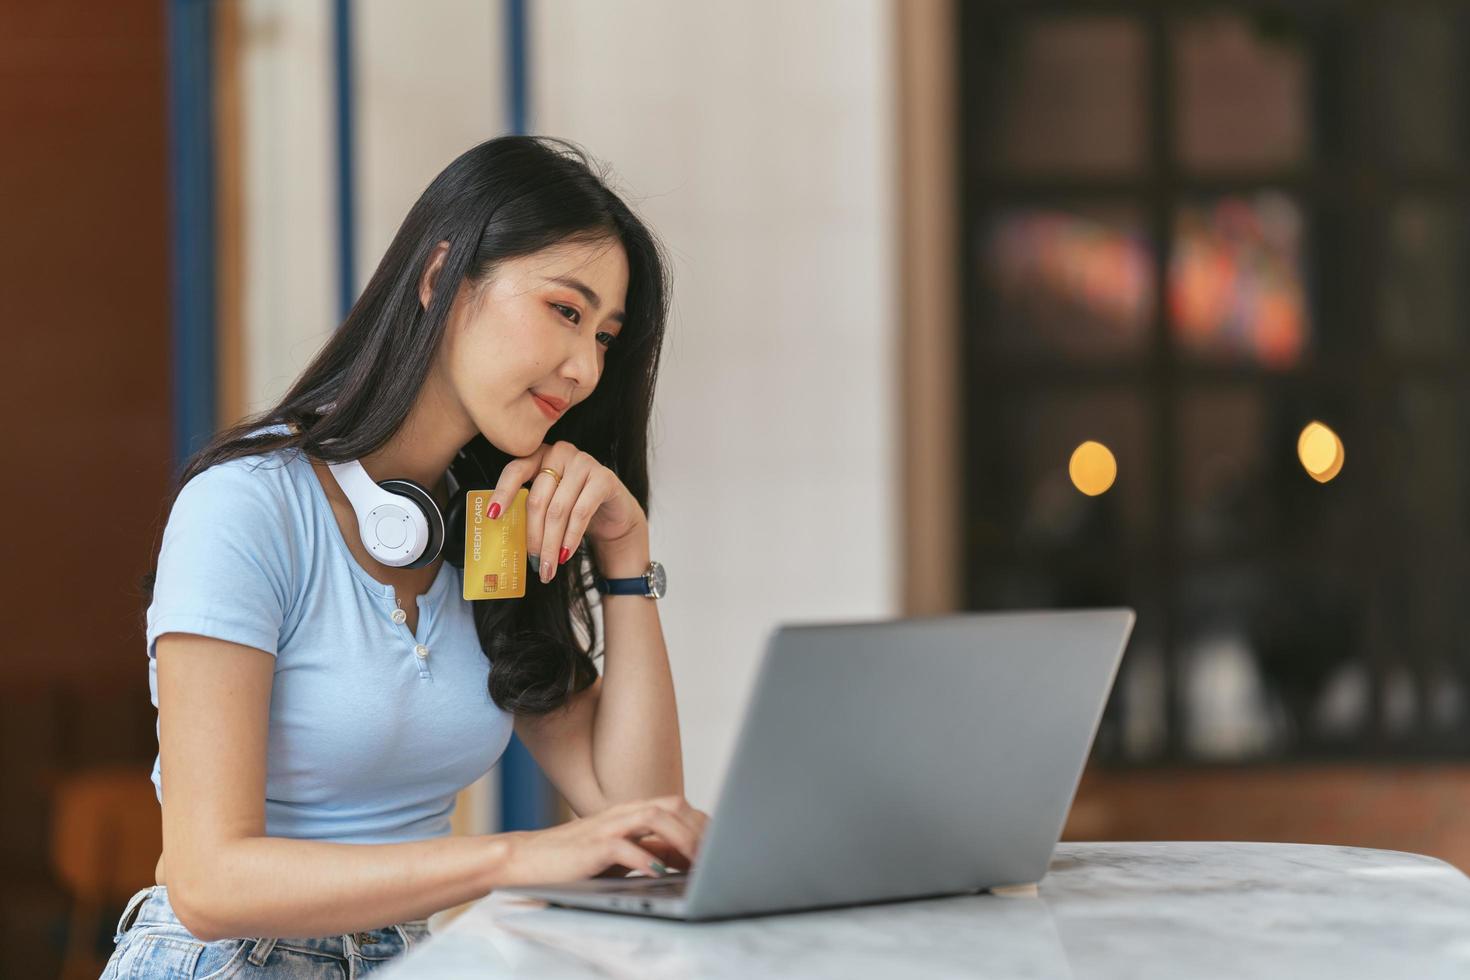 Online Banking Concept. Portrait Of Happy Young Asian Woman With Laptop And Credit Card Sitting in cafe, Smiling Asian Women Enjoying Making Payments From Home. photo